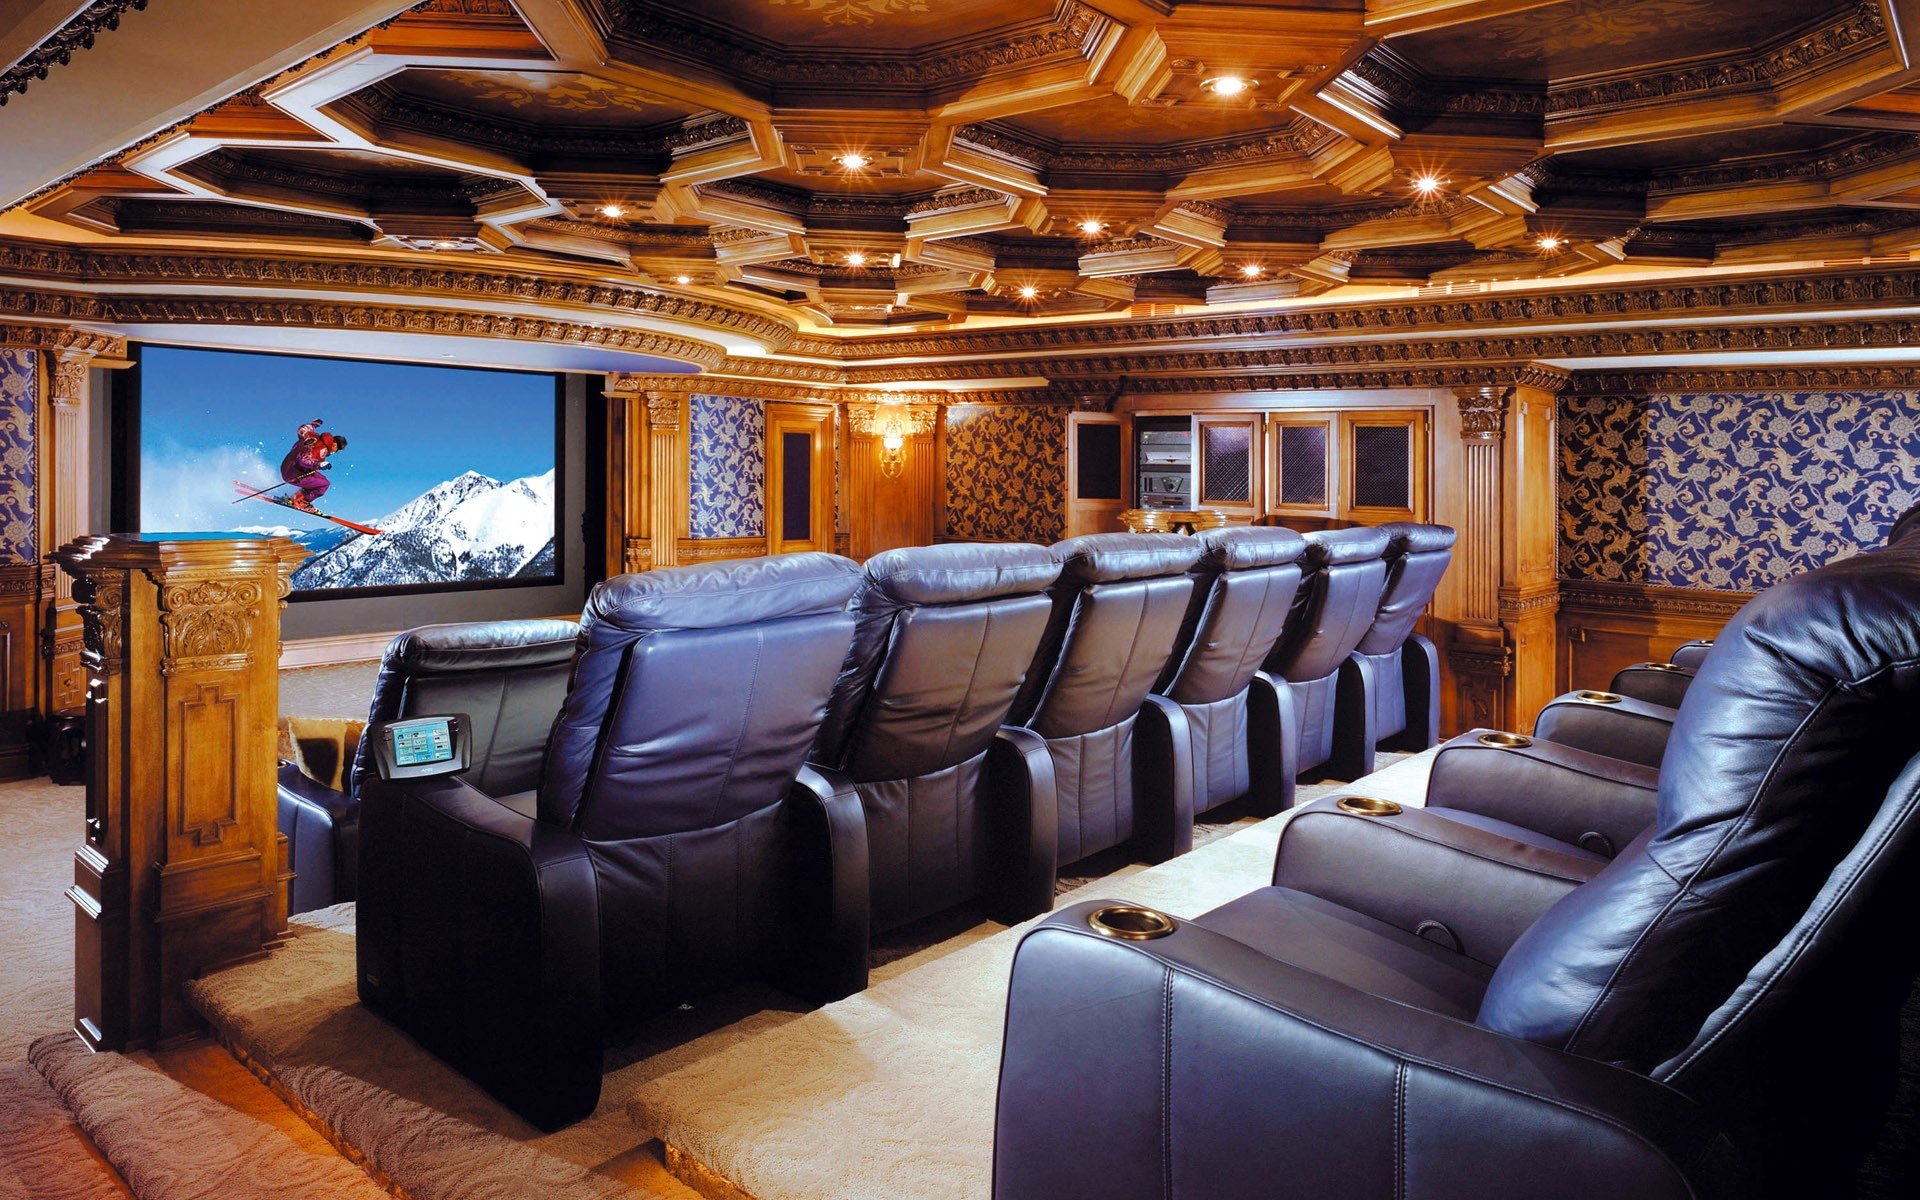 home cinema, Movie theater, Interior design Wallpapers HD / Desktop and